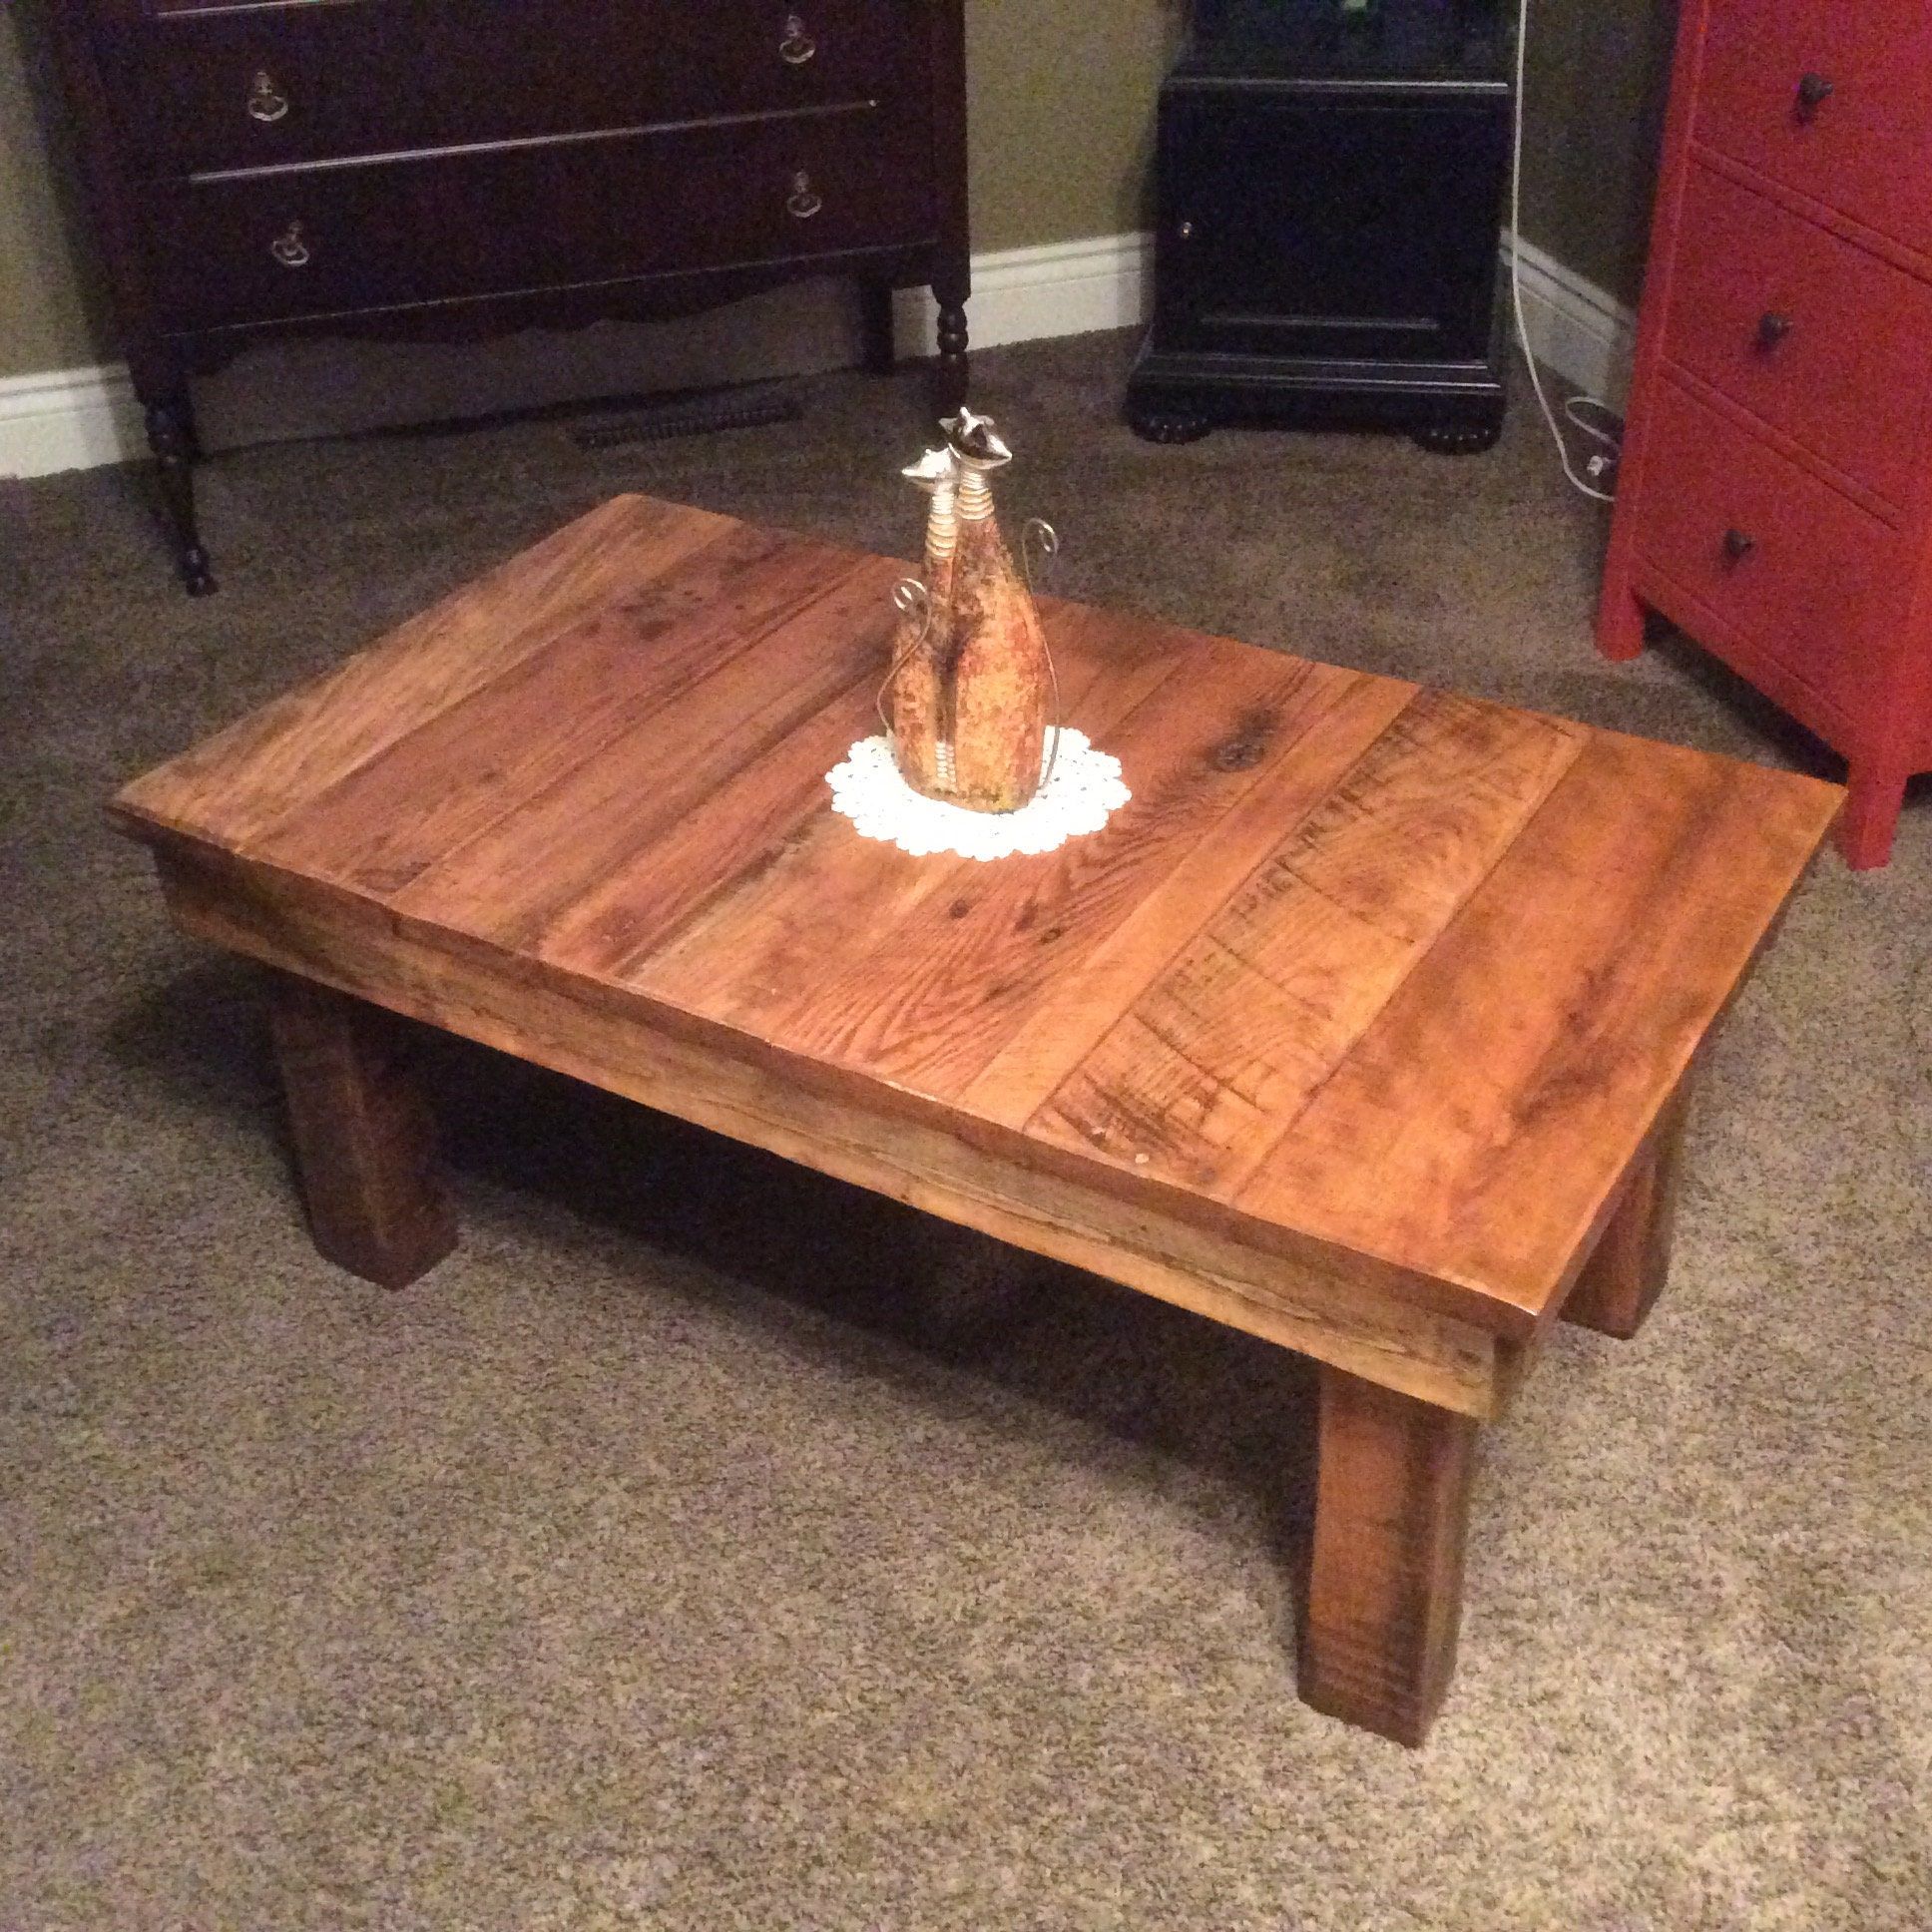 Reclaimed Wood Rustic Coffee Table With Barnwood Coffee Tables (View 3 of 15)